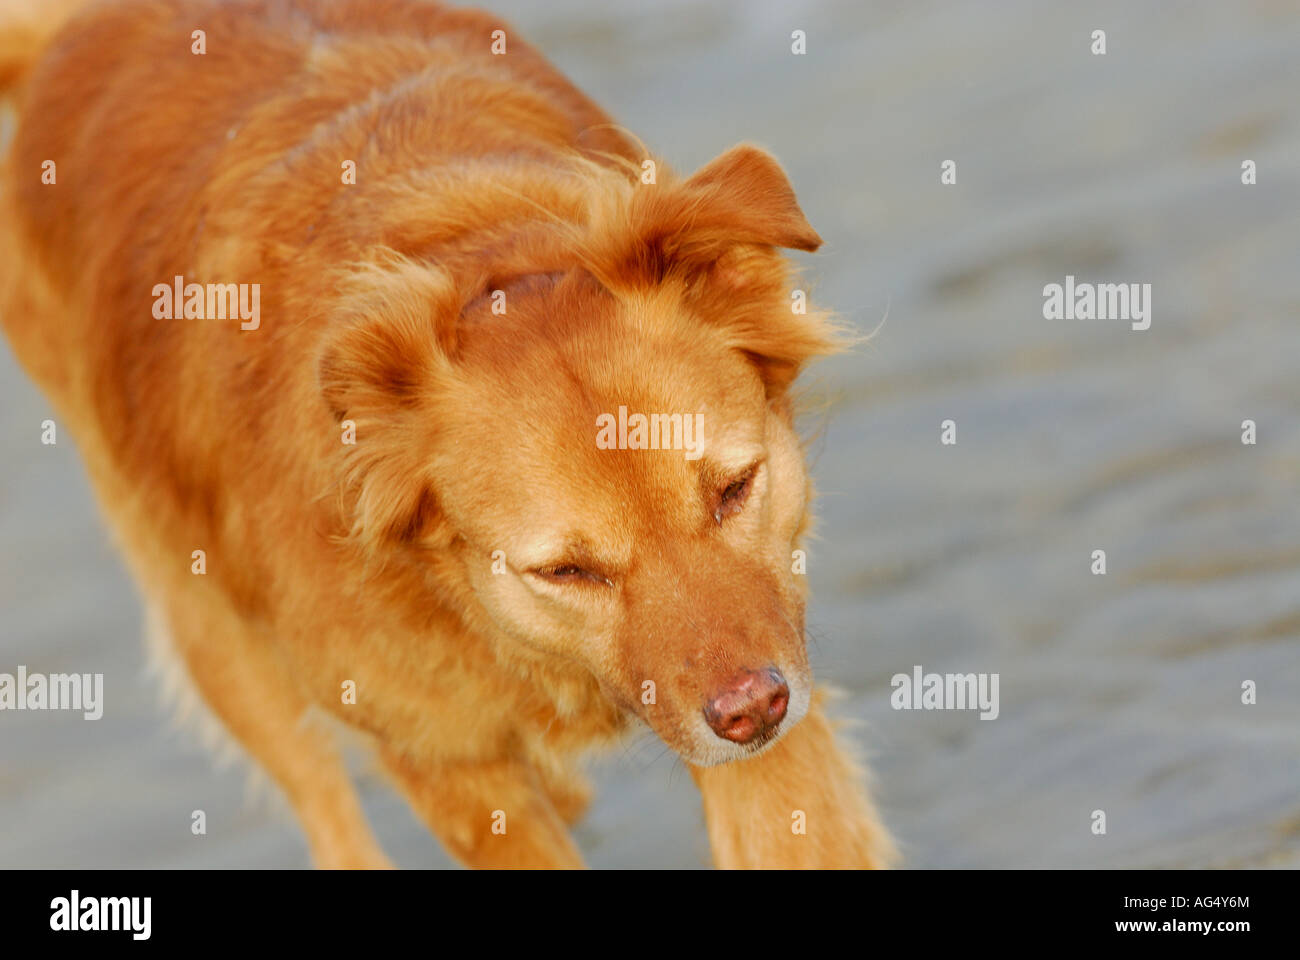 dog on the beach running with a golden coat and looking healthy panting out of breath dog walking shiny coat walkies Stock Photo